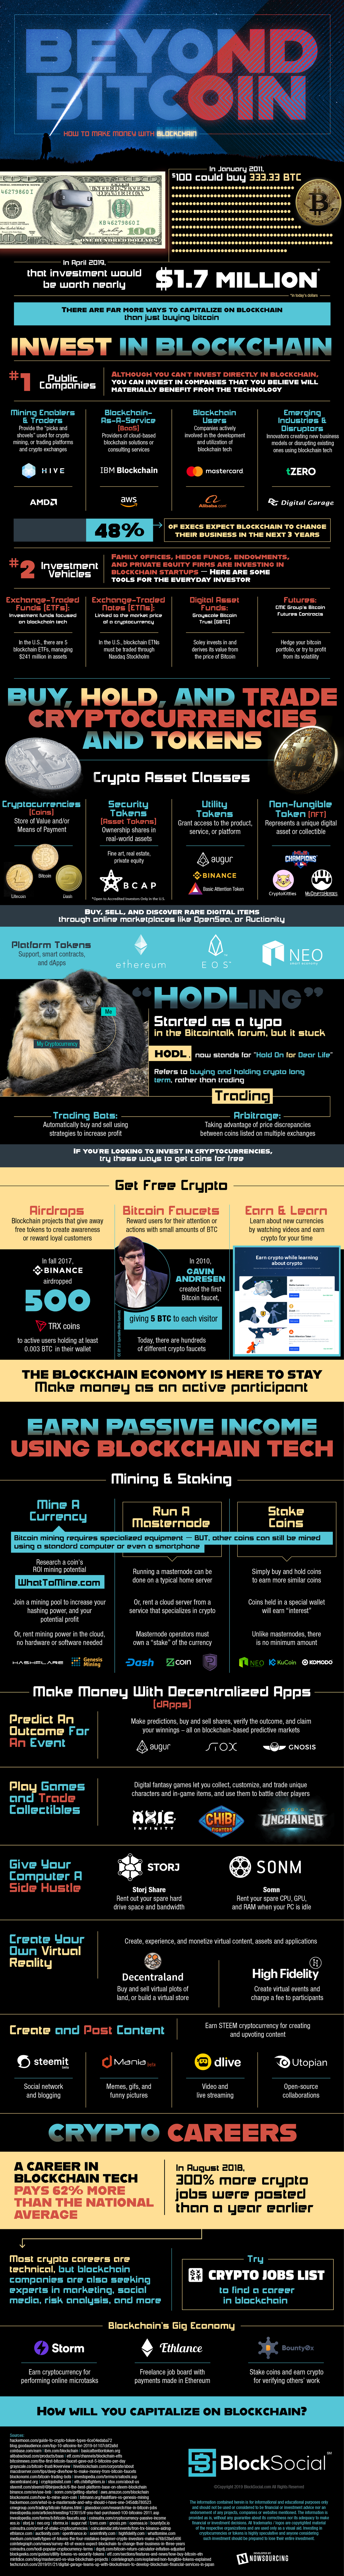 Beyond Bitcoin How To Make Money With Blockchain The Daily Hodl - 